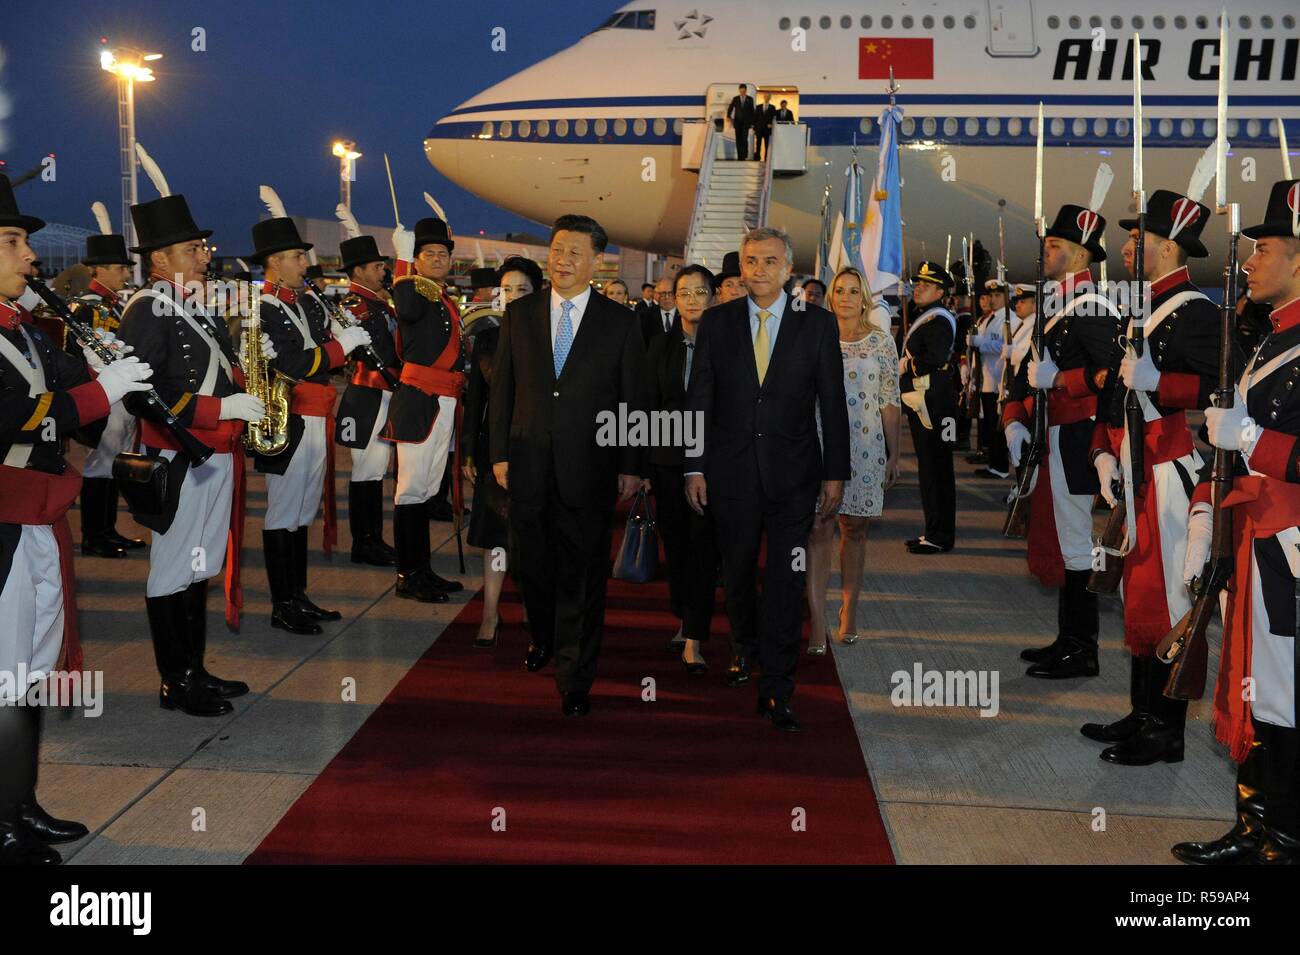 Chinese President Xi Jinping is escorted by Argentine President Mauricio Macri, right, as they arrive at the Ministro Pistarini international airport November 29, 2018 in Buenos Aires, Argentina. Xi will join other world leaders in the Group of 20 industrialized nations Summit meeting. Stock Photo